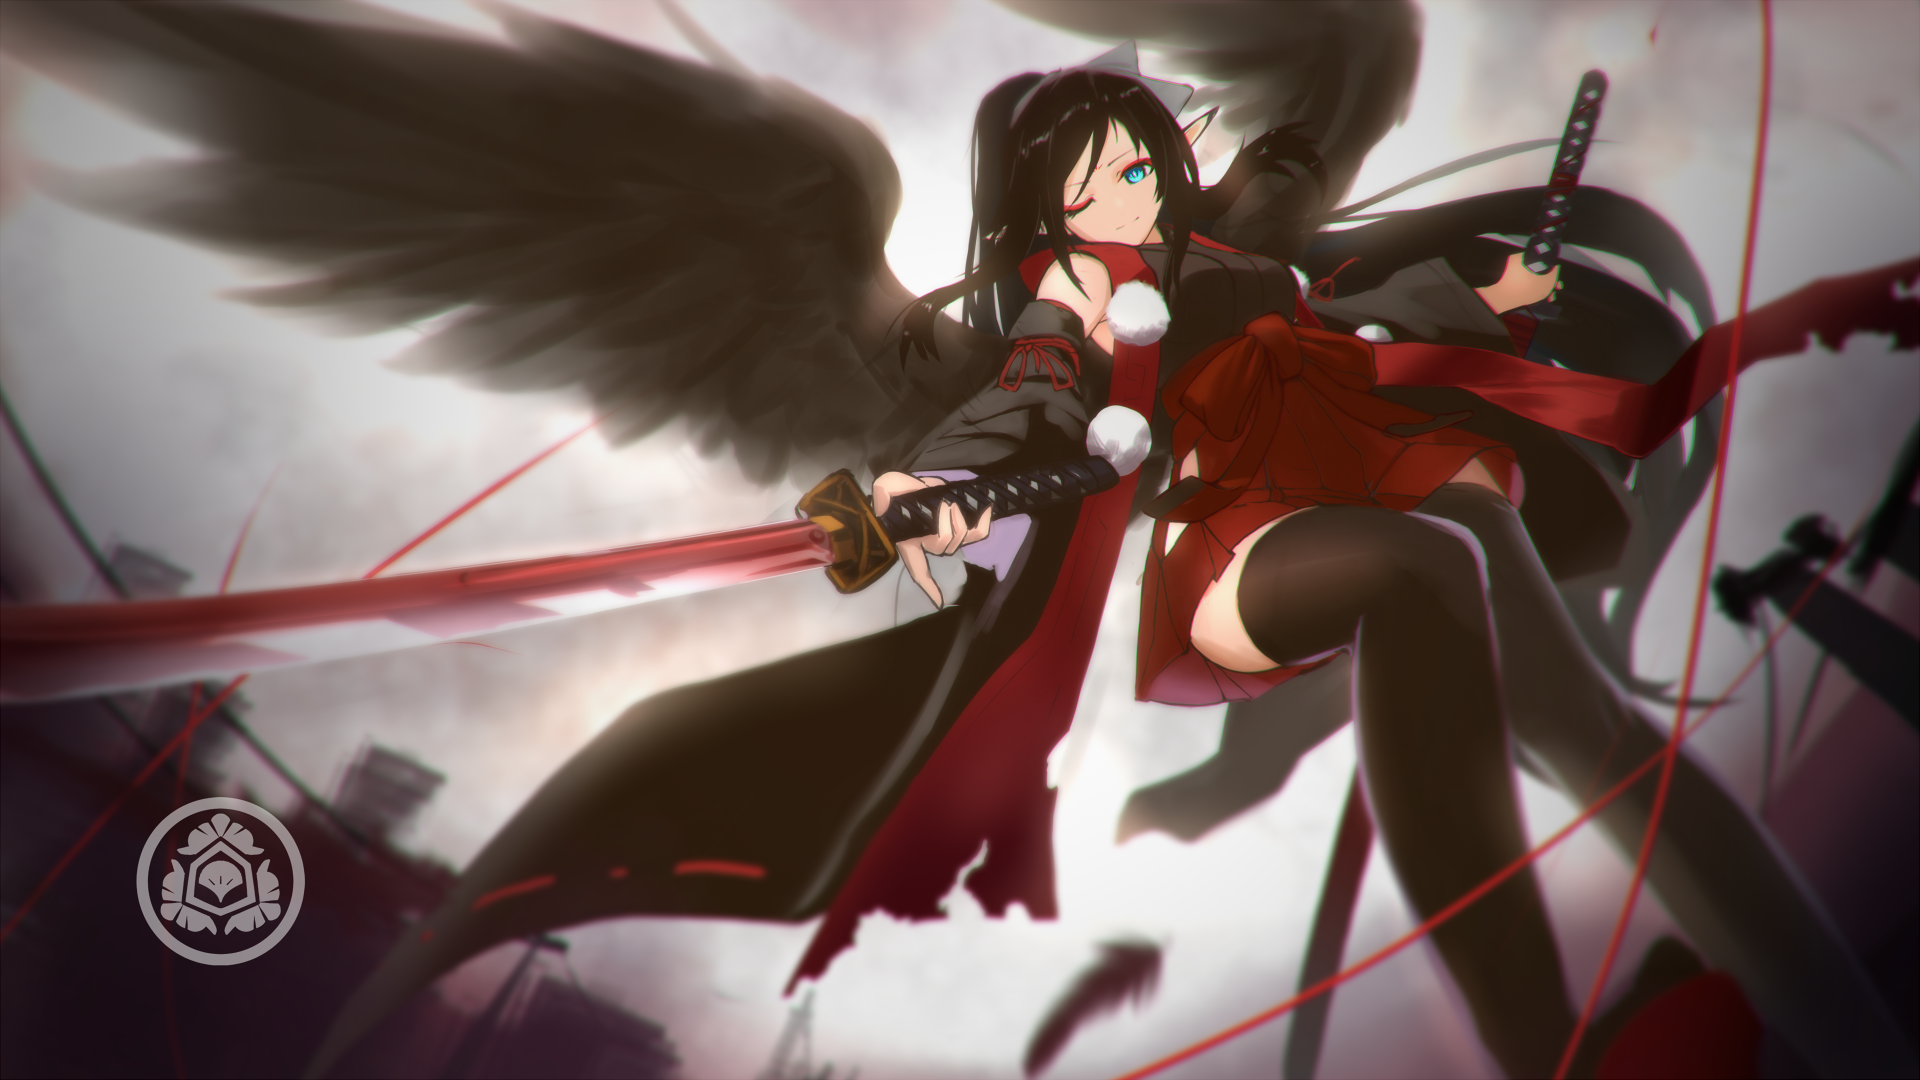 Anime 1920x1080 anime anime girls long hair blue eyes wings elves sword thigh-highs Pixiv women with swords girls with guns pointy ears stockings black stockings one eye closed